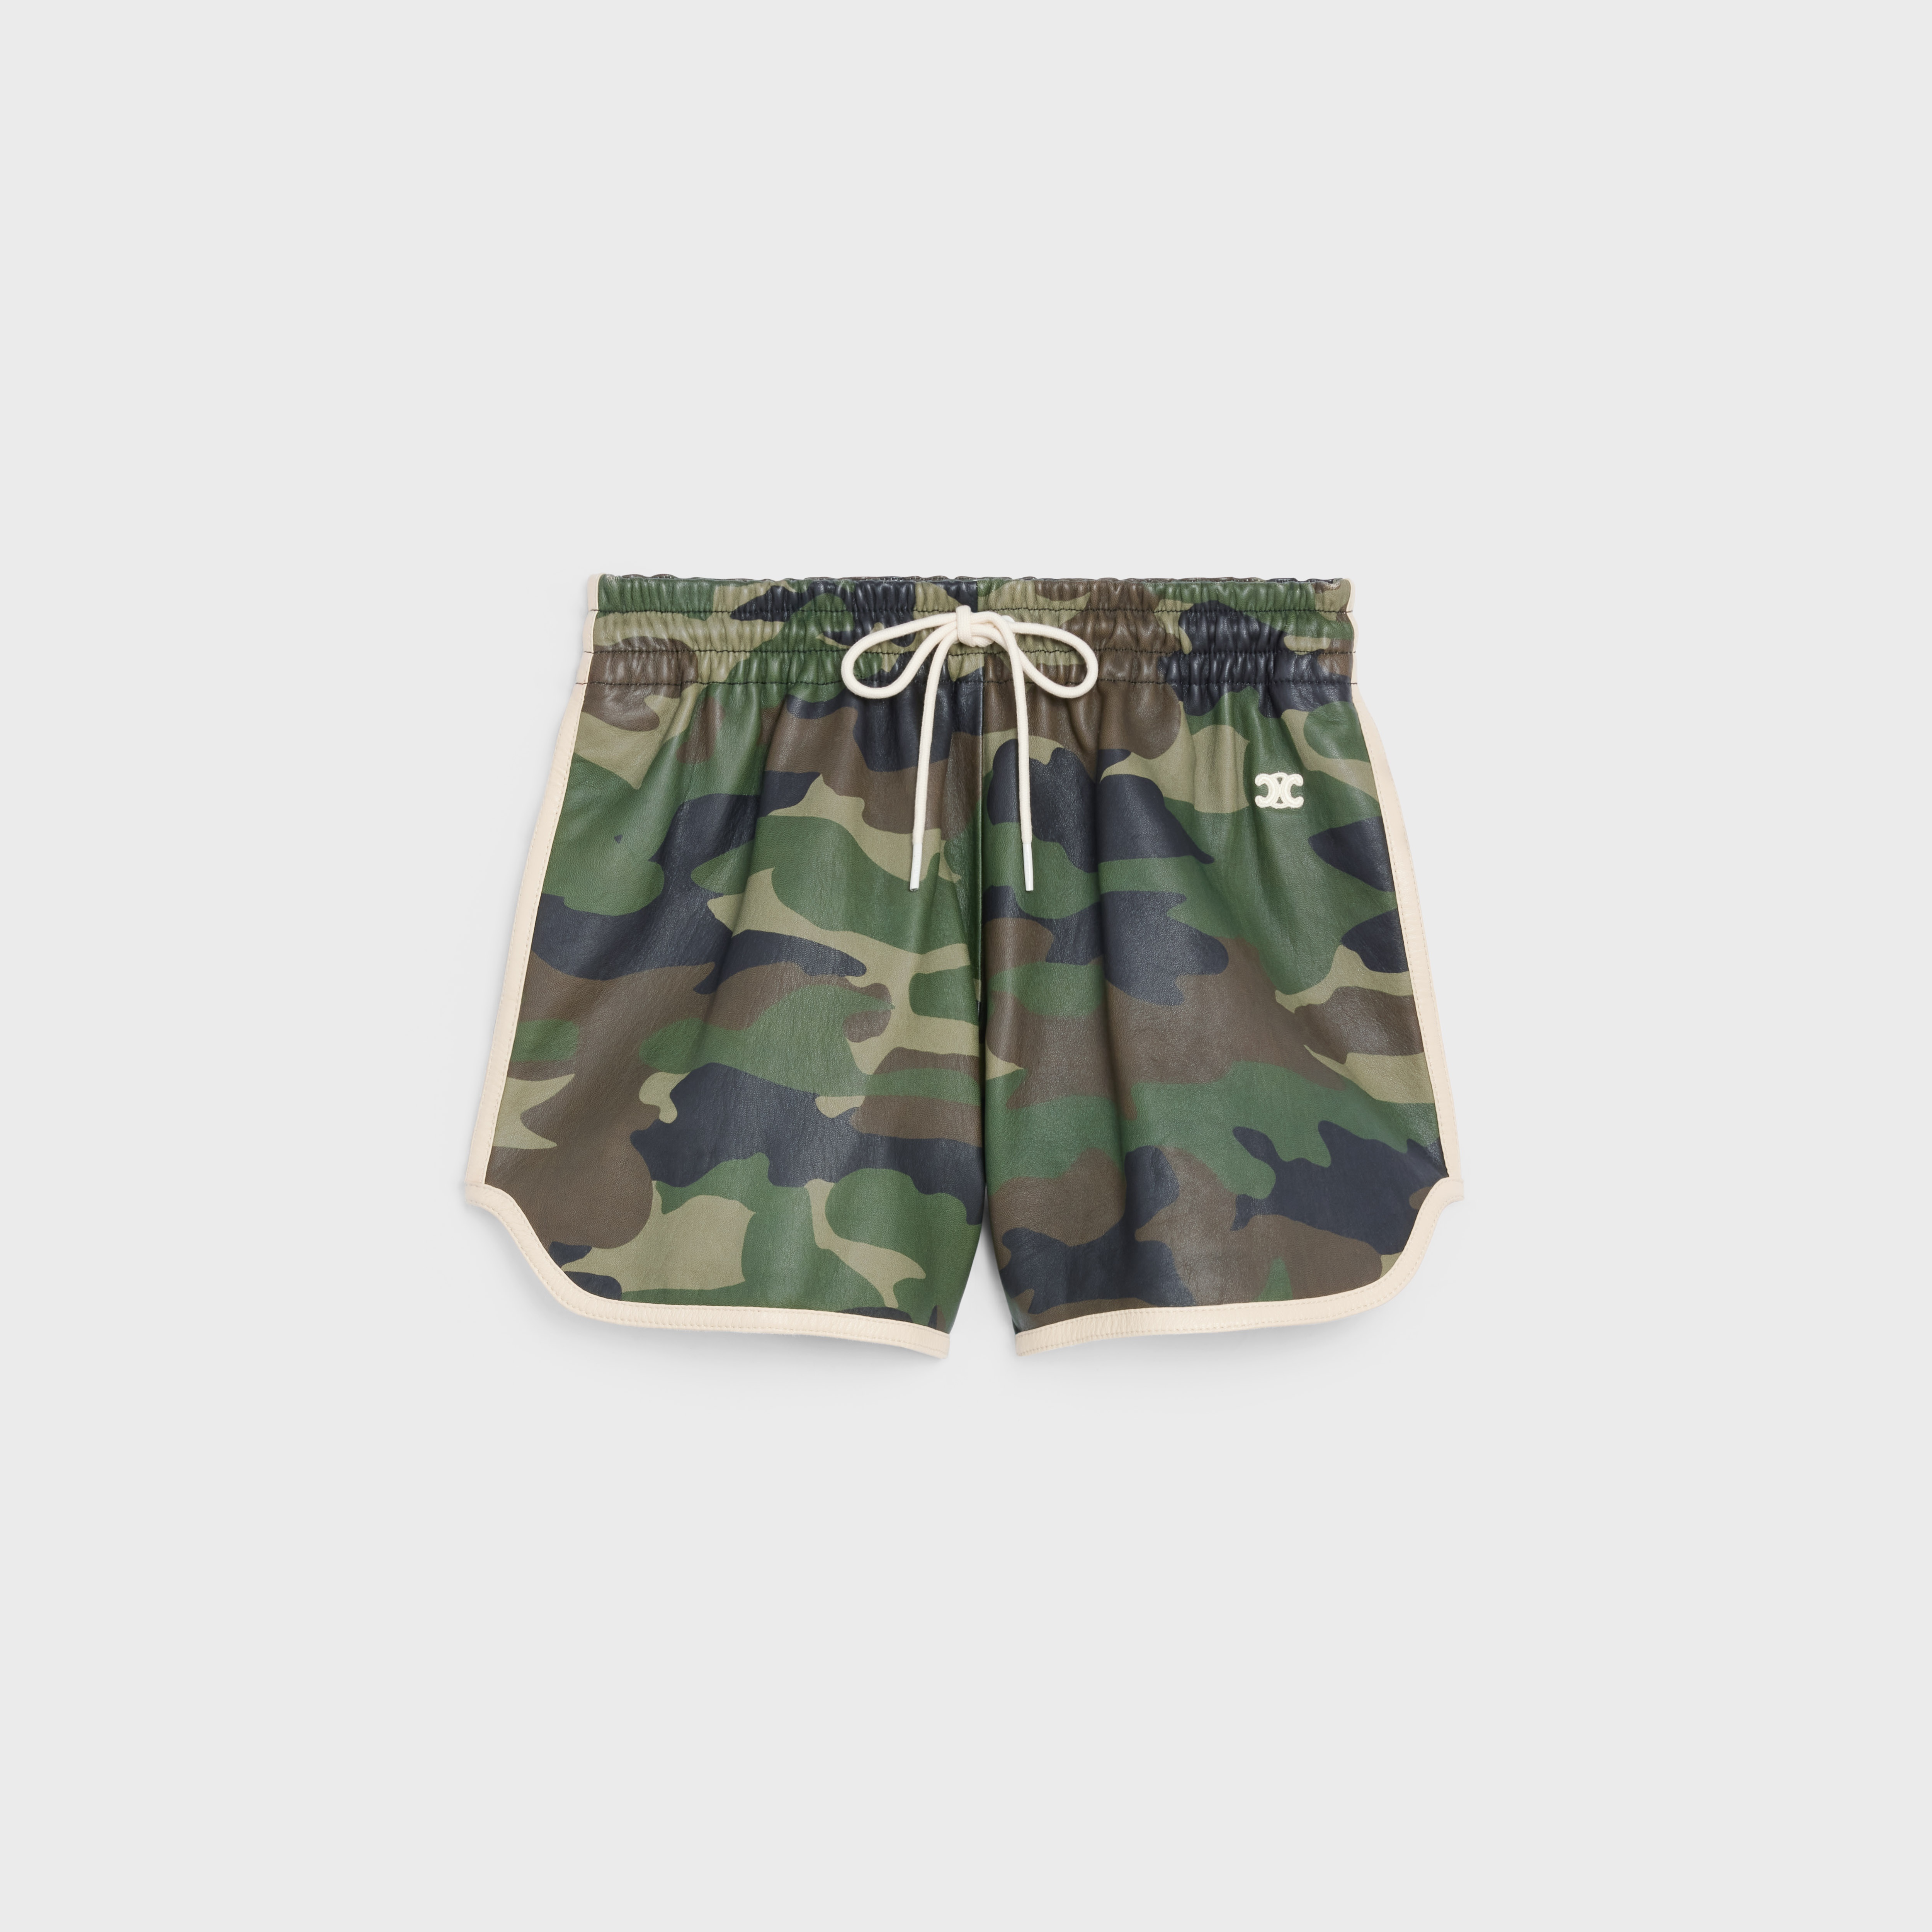 CROPPED ATHLETIC SHORTS IN CAMO - 1